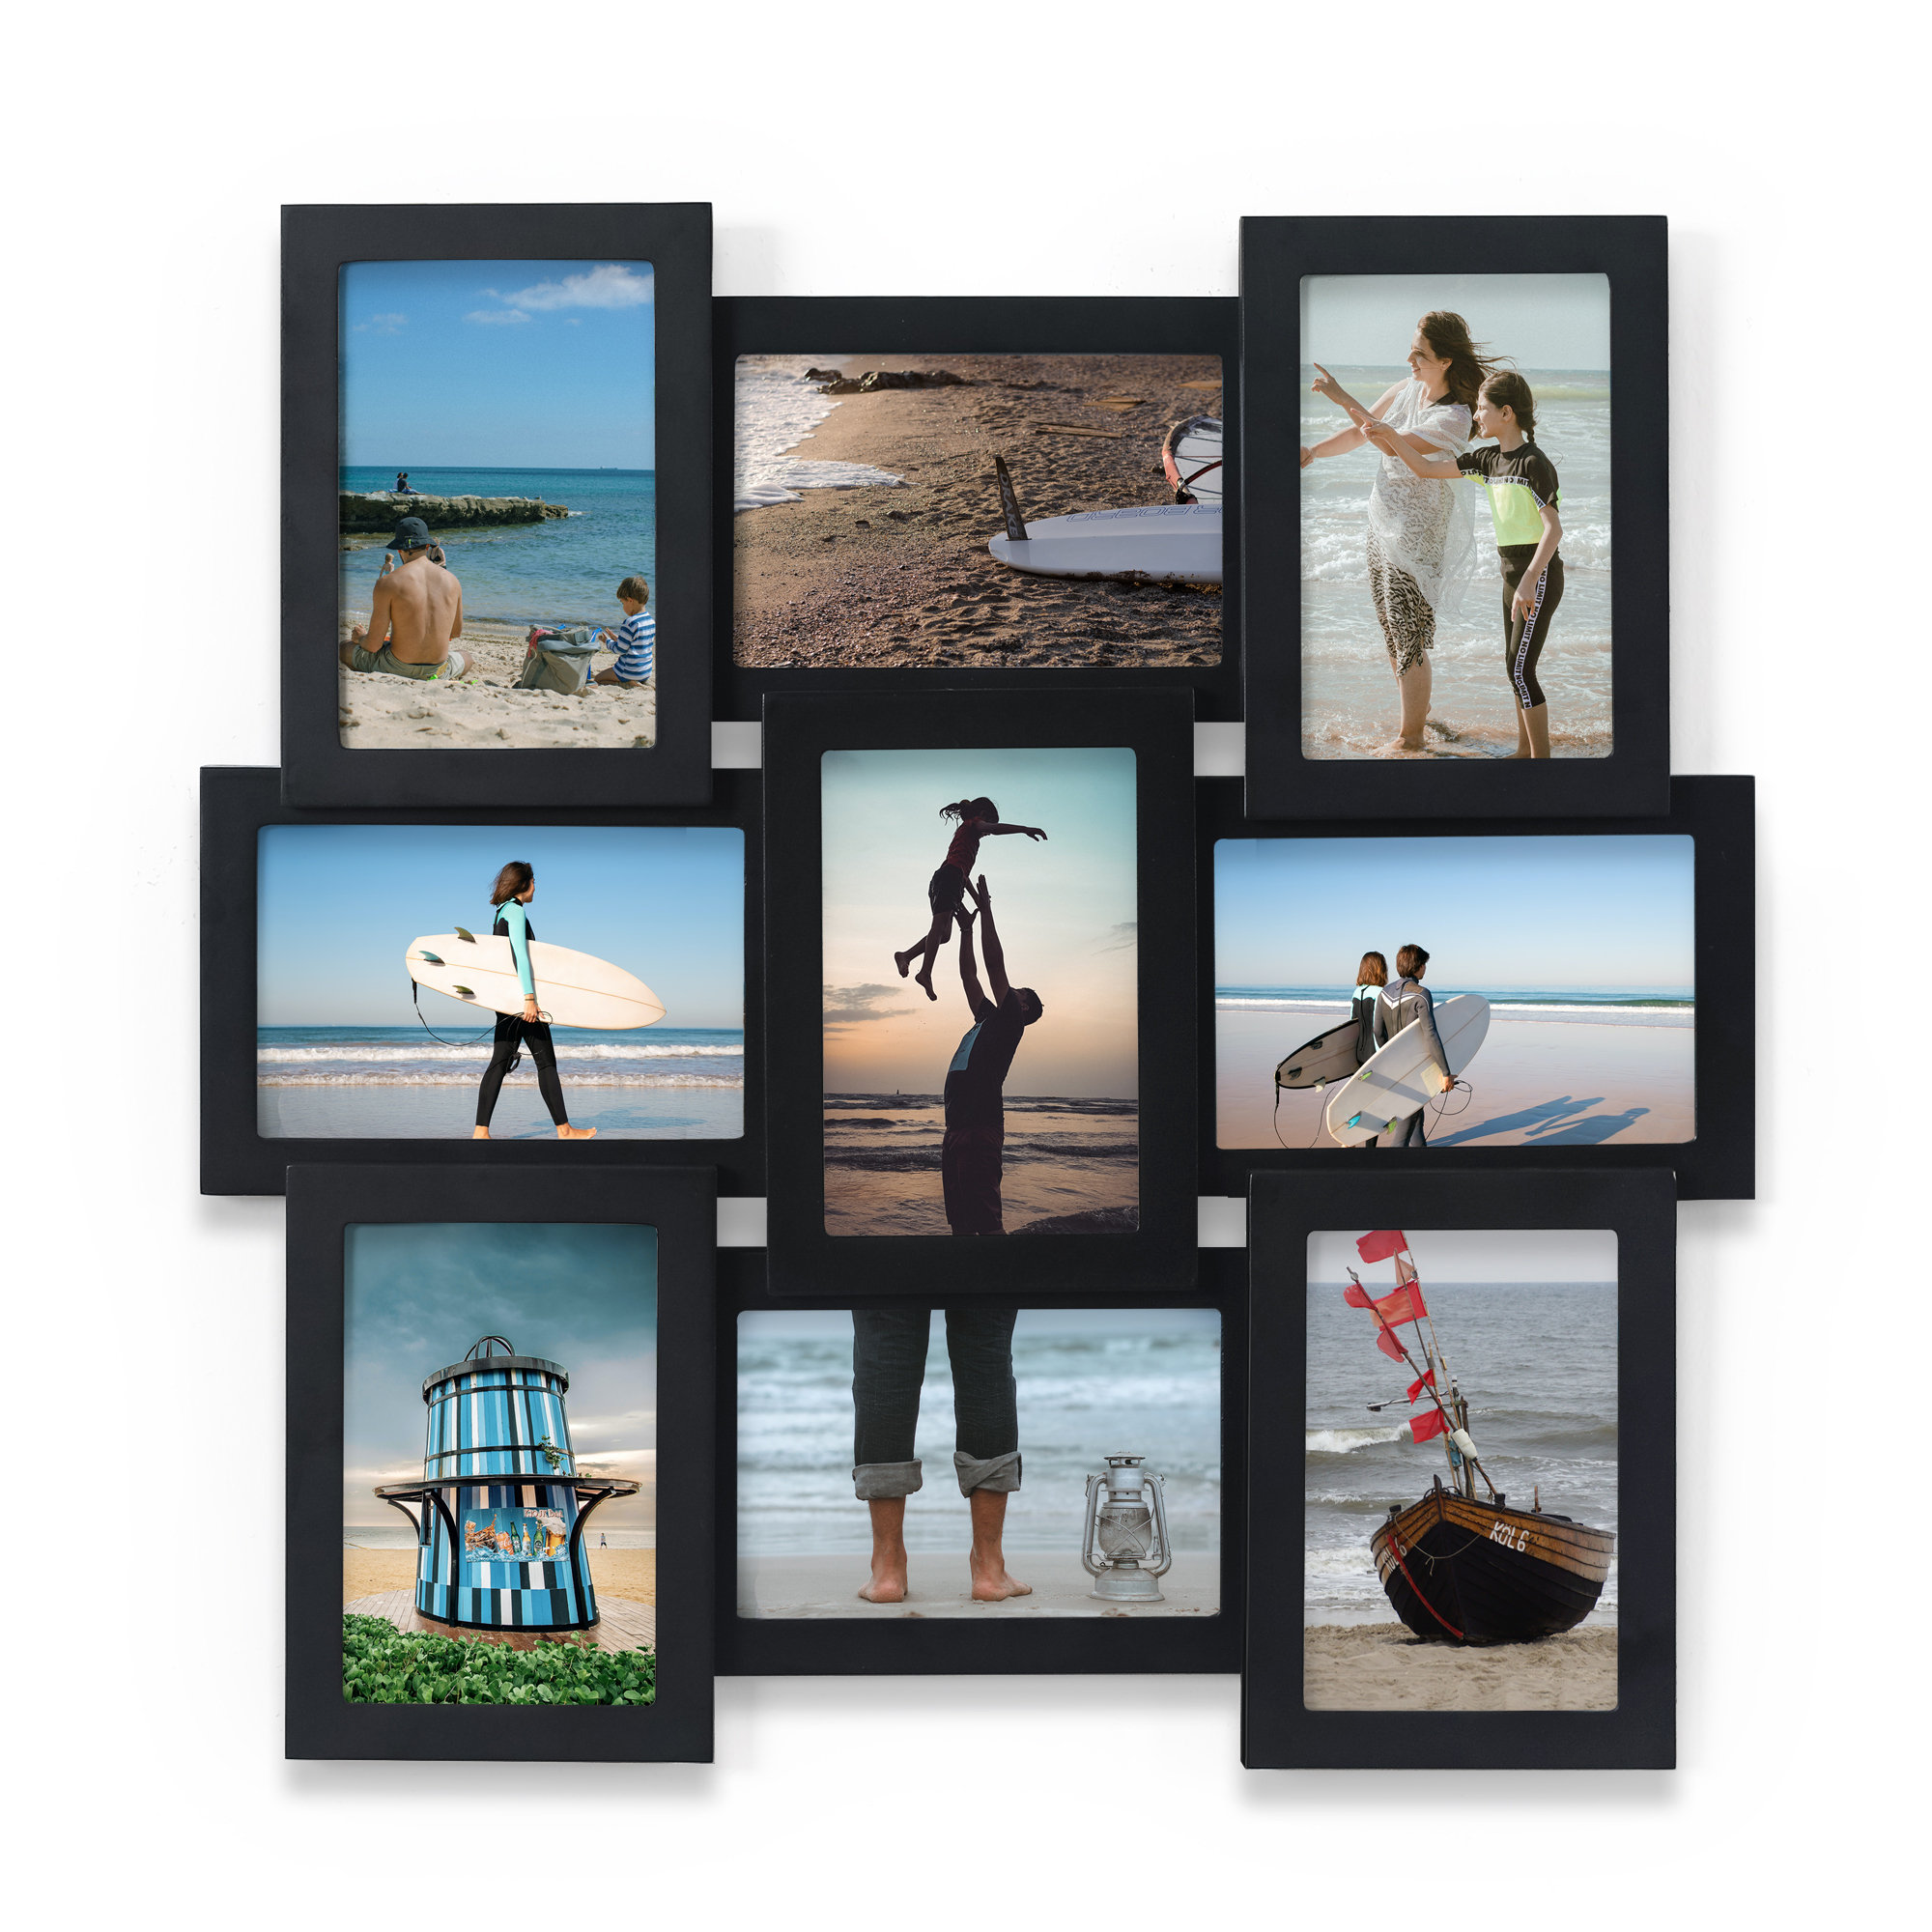  MONT PLEASANT Picture Frame Collage 4x6 Photos Display - 7  Openings Photo Collage Picture Frame Wall Decor for Tabletop Stand and Wall  Mounting Frames Collage Set for Home Decor Family